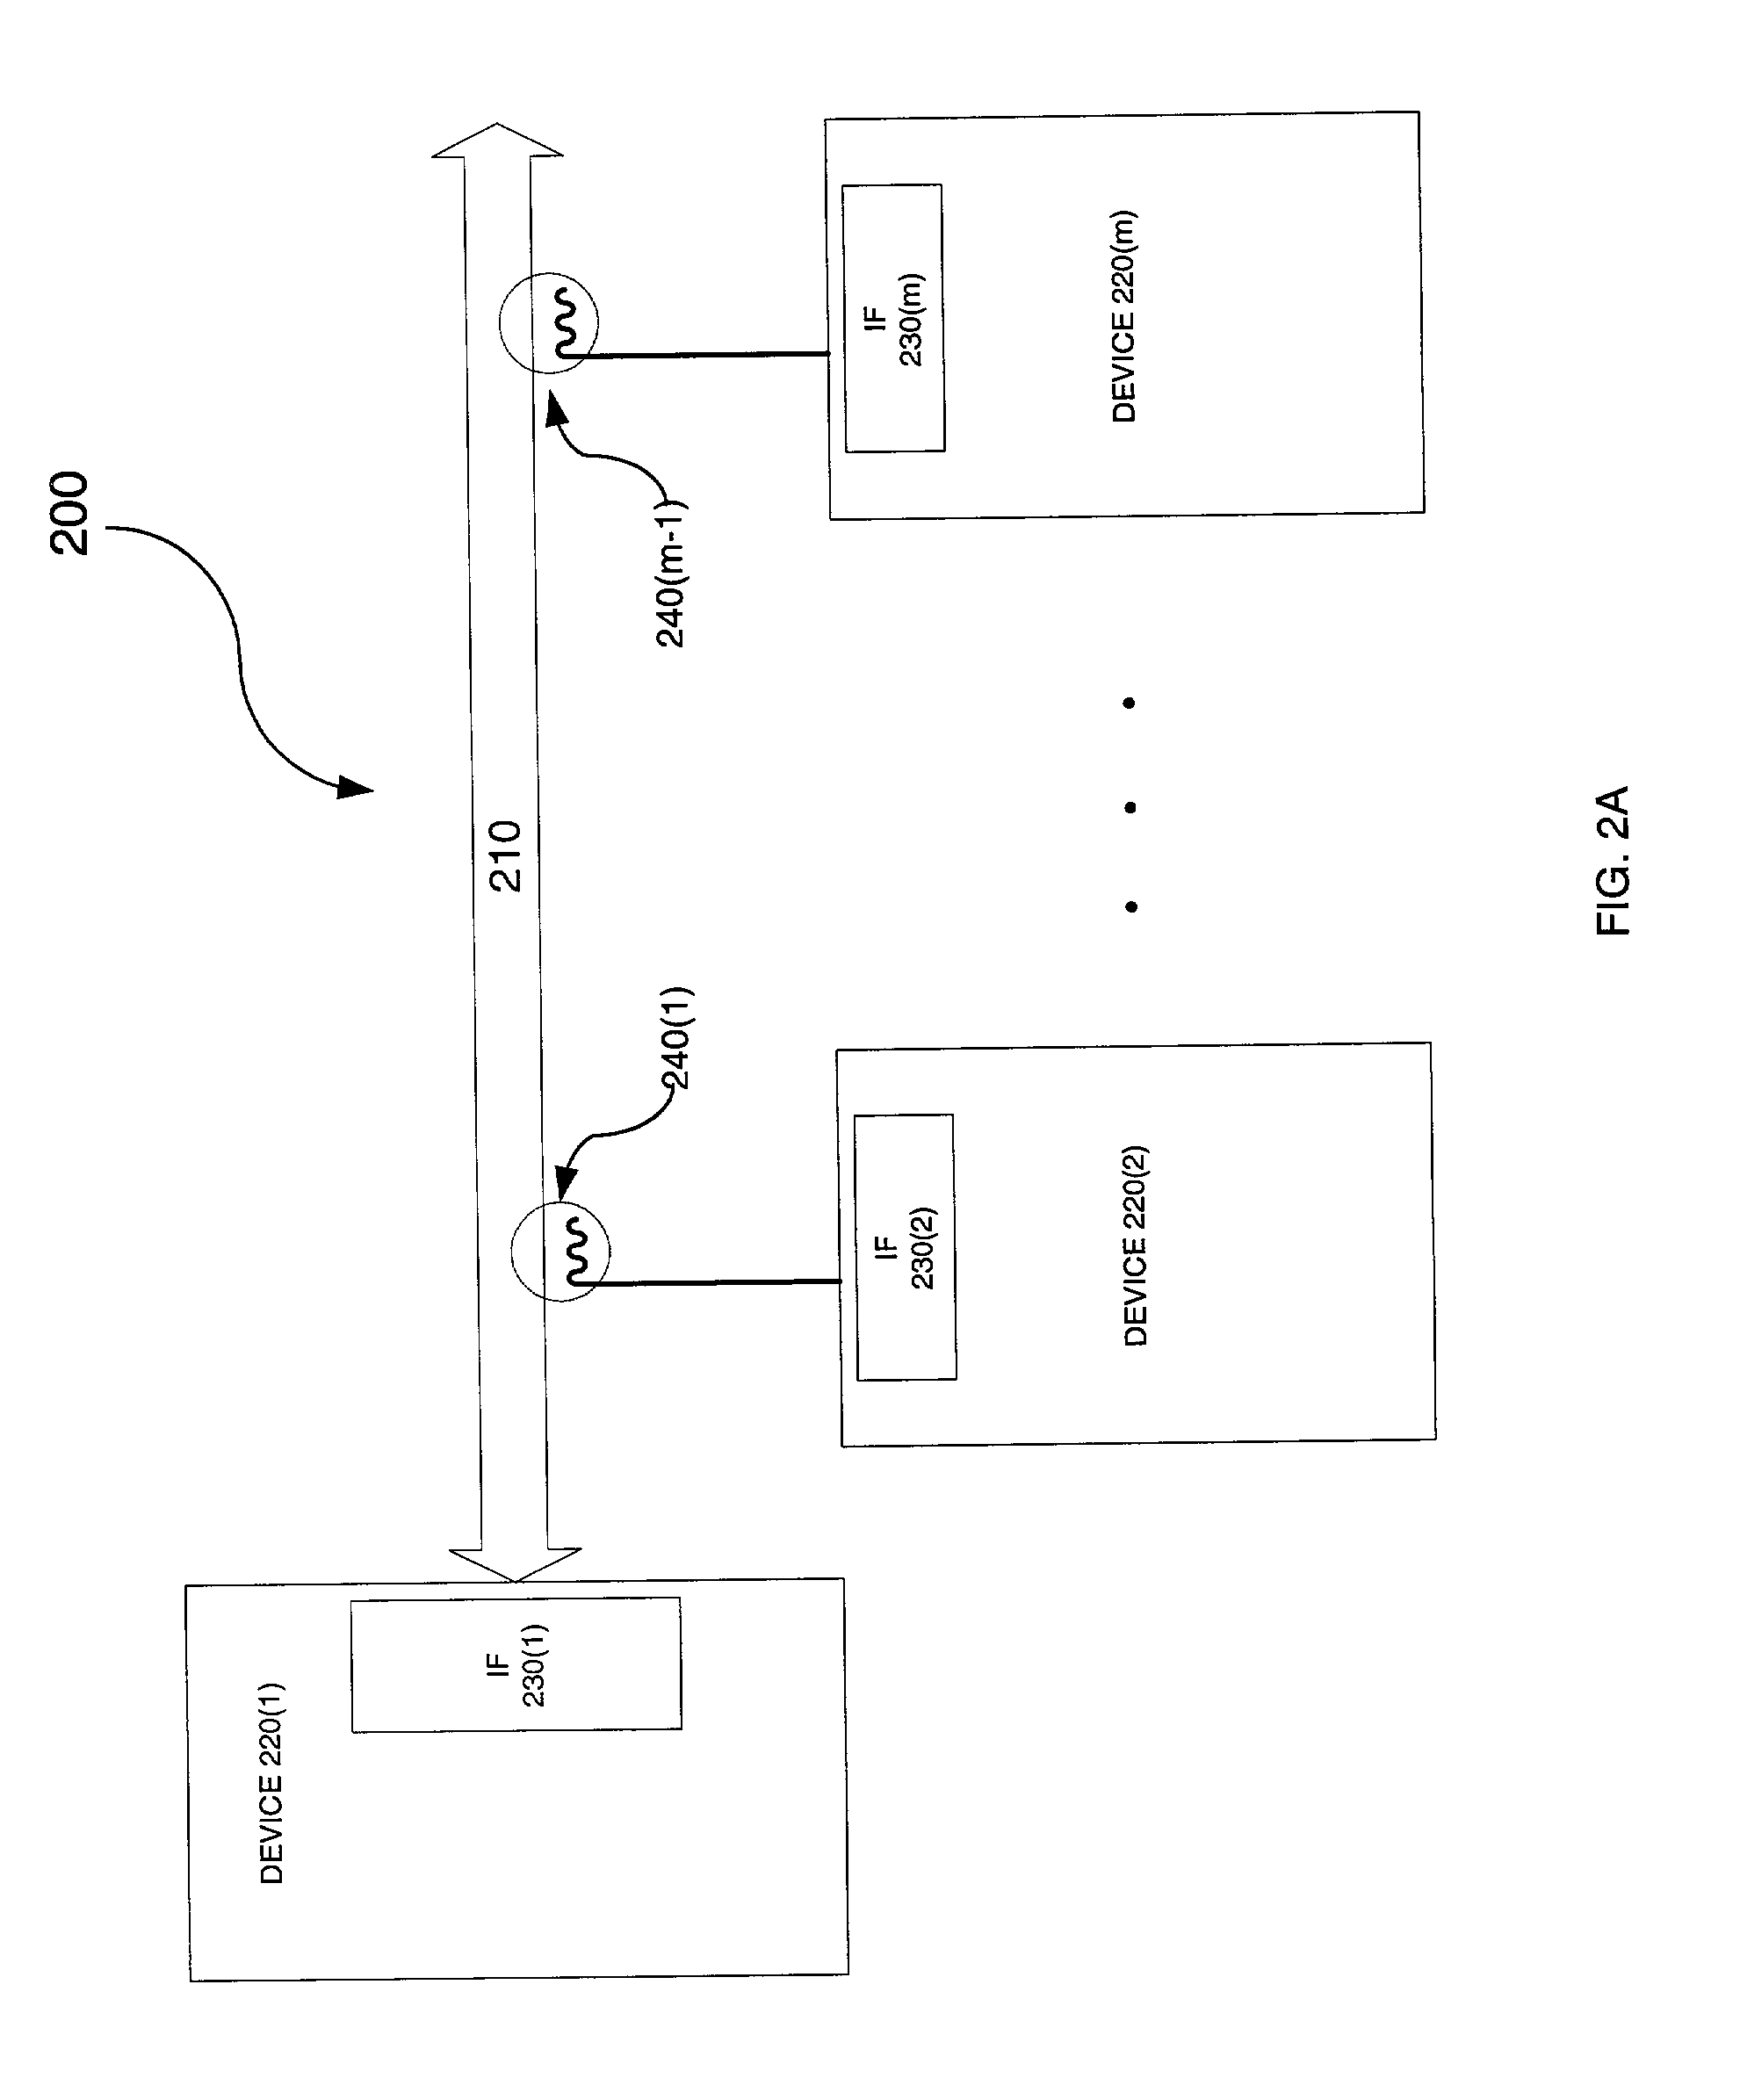 Symbol-based signaling device for an electromagnetically-coupled bus system